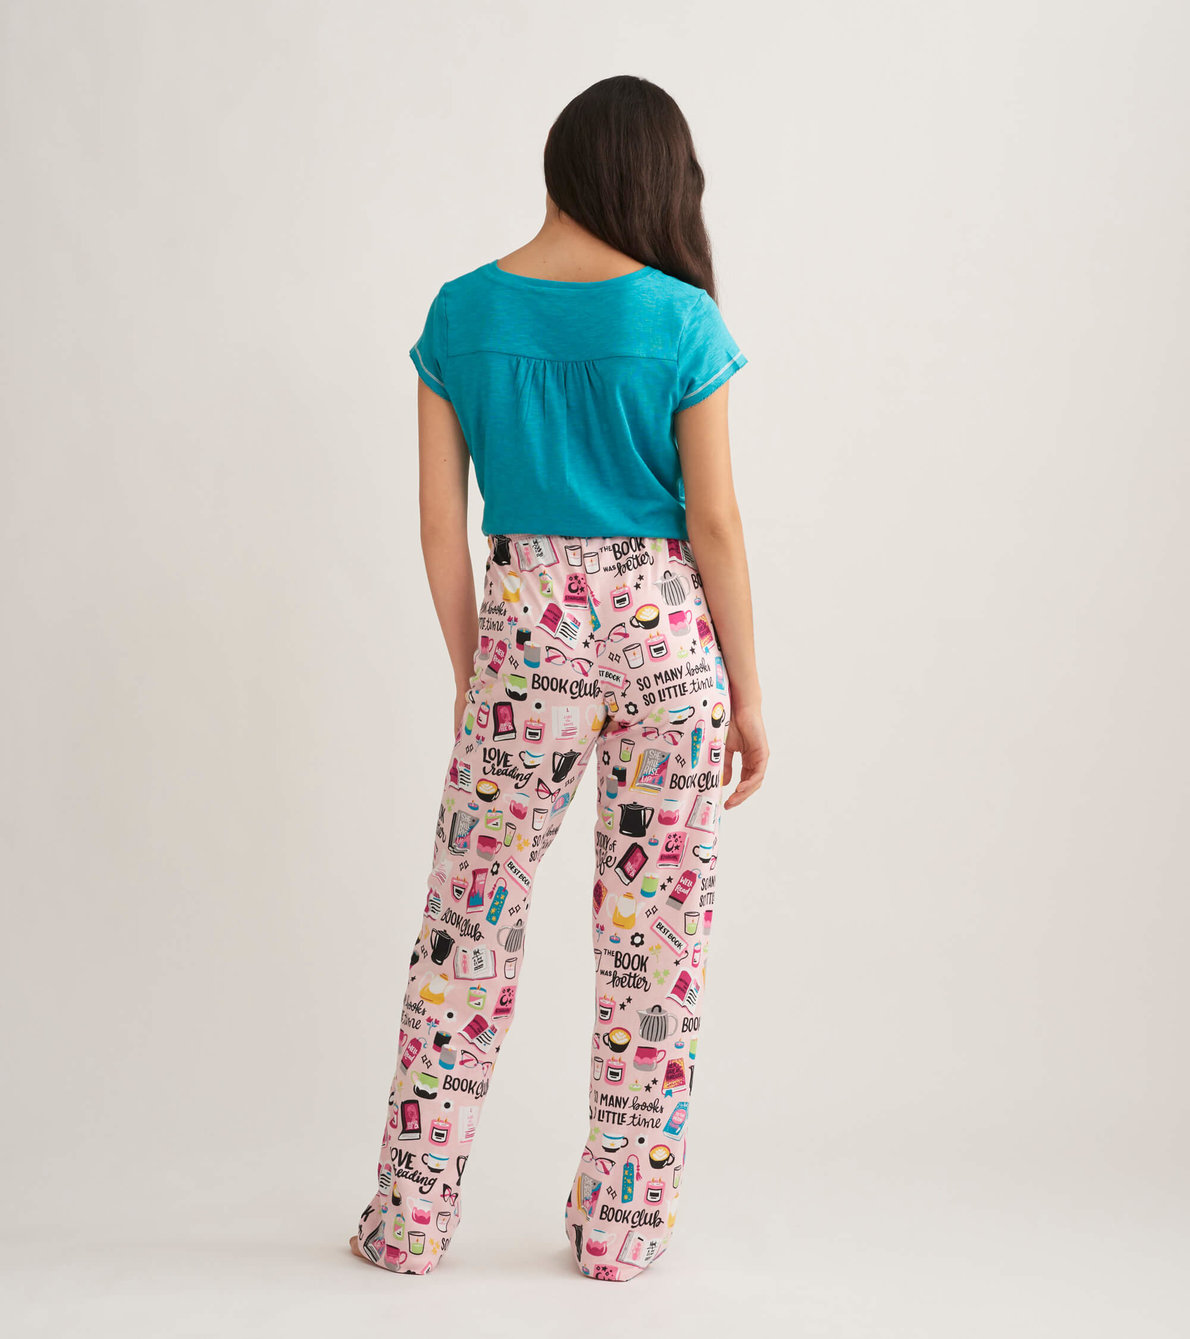 View larger image of Book Club Women's Tee and Pants Pajama Separates